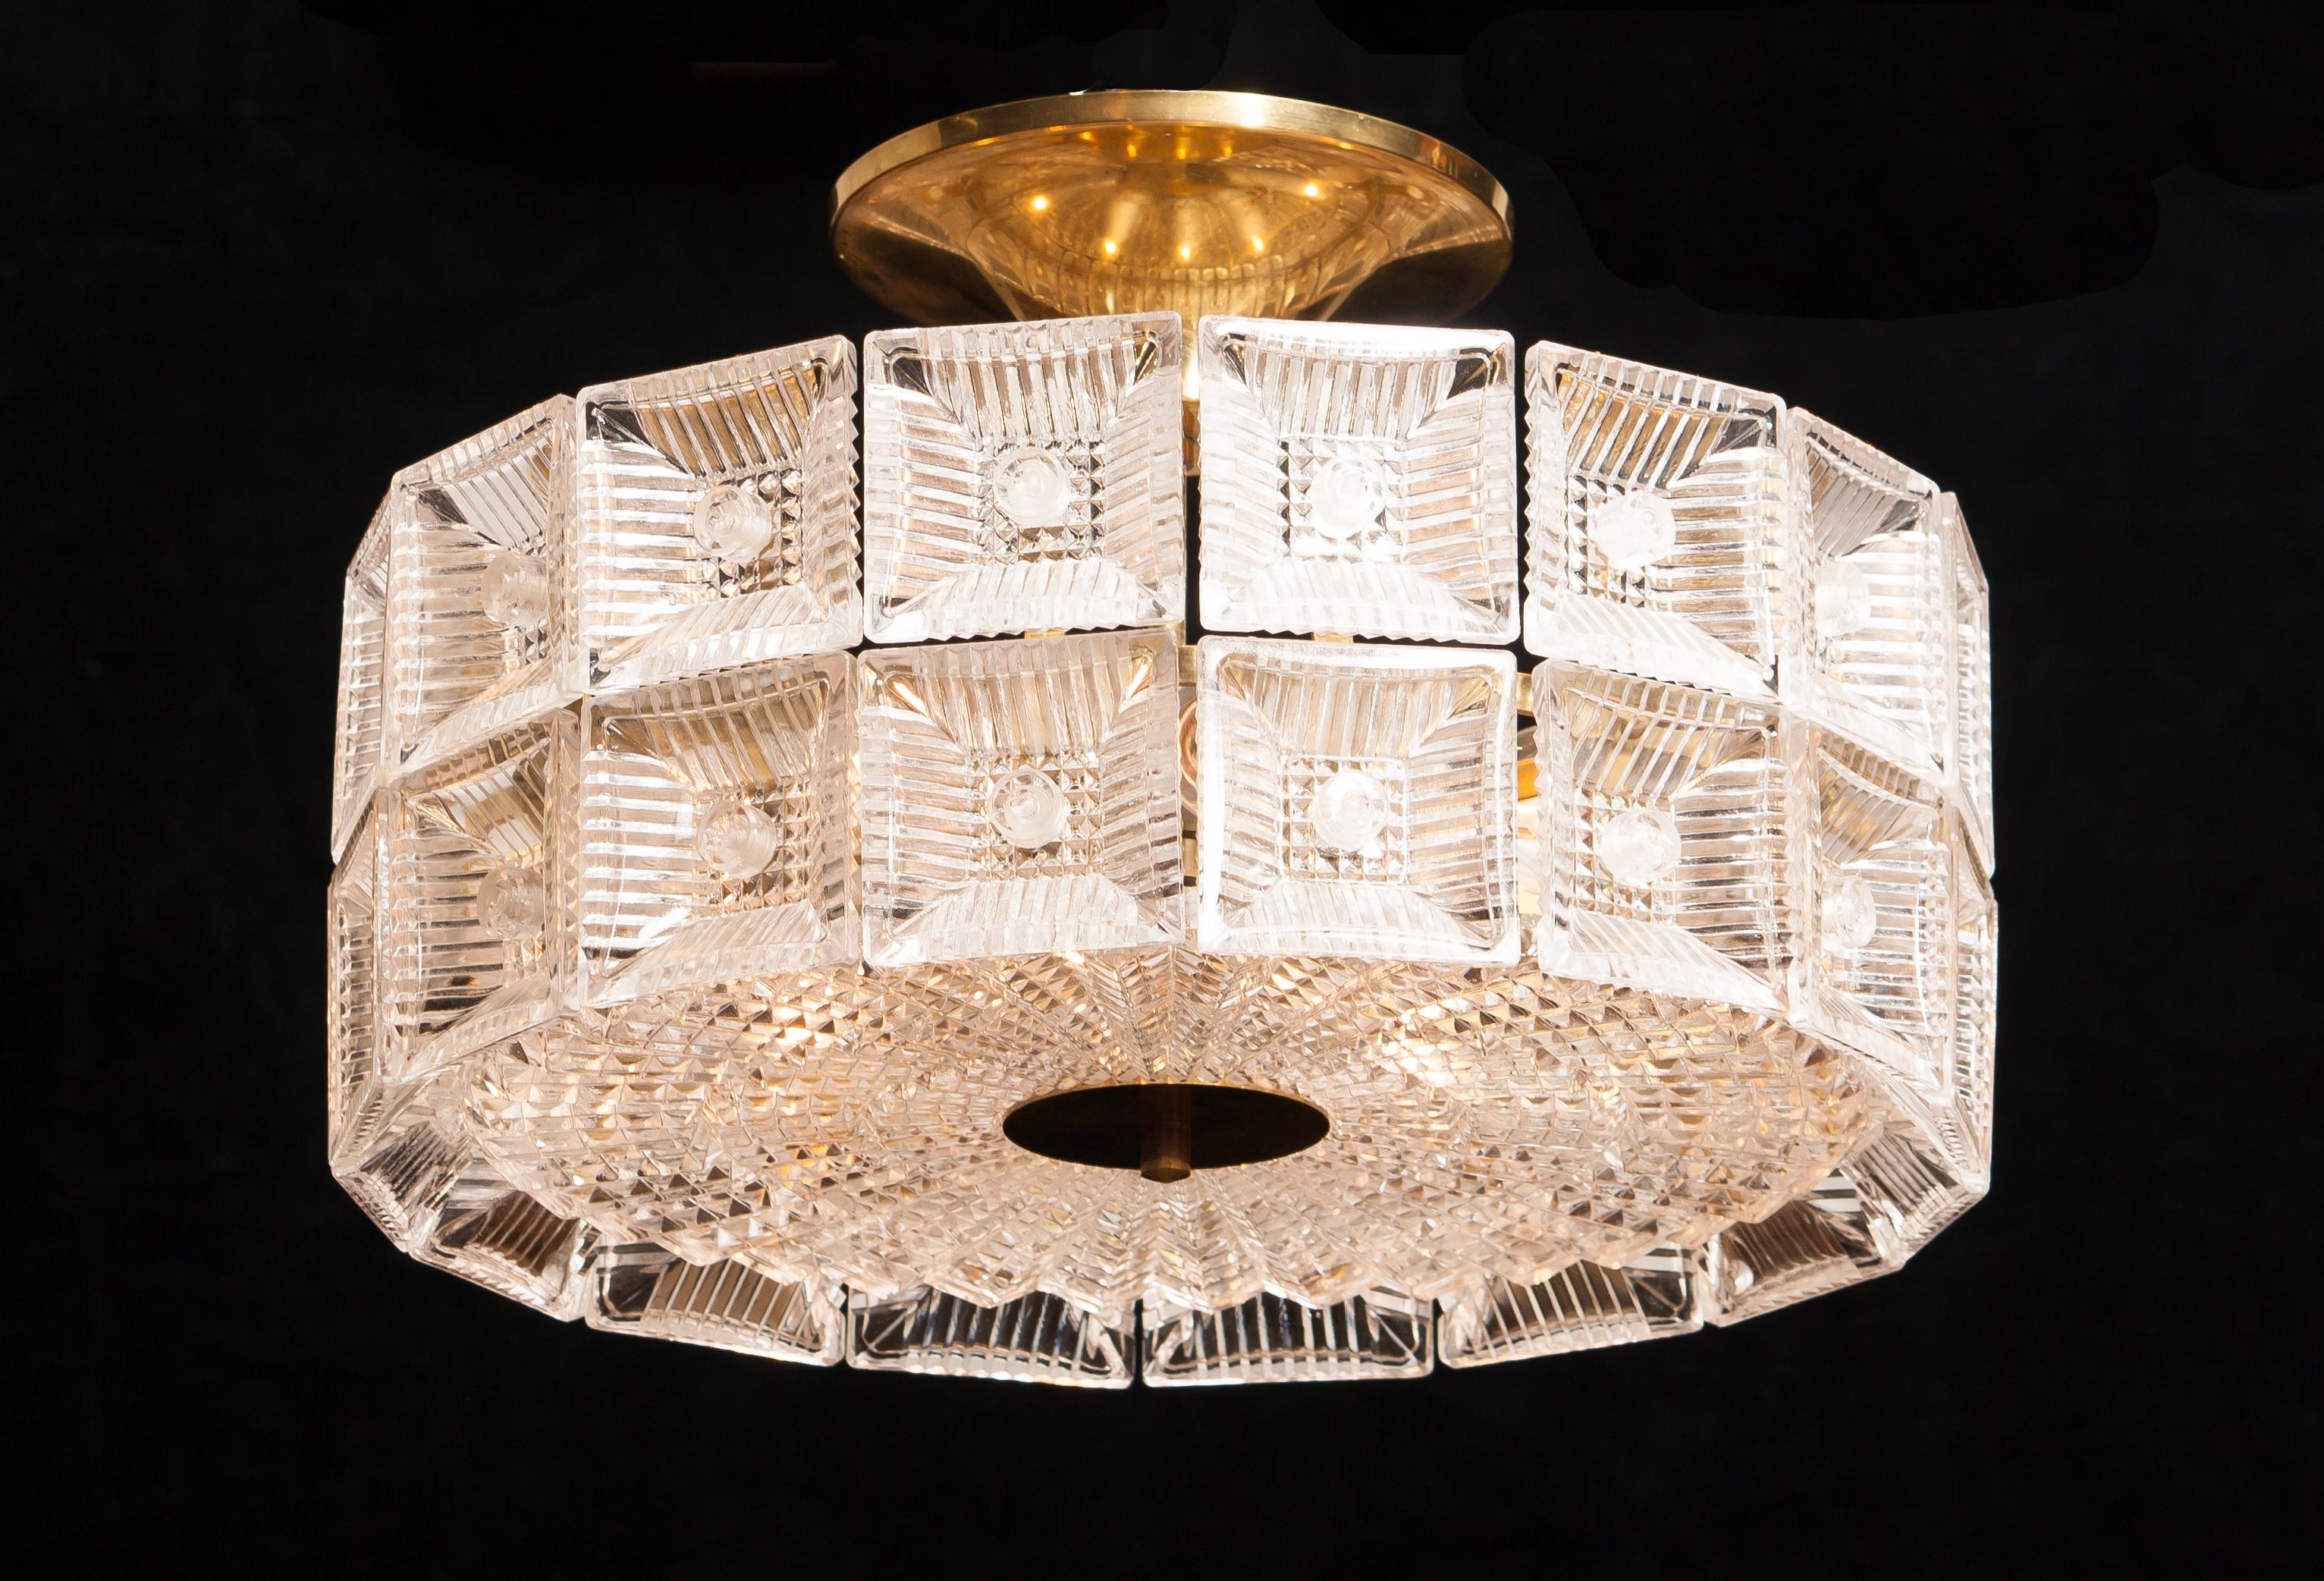 Magnificent ceiling light designed by Carl Fagerlund for Orrefors Sweden.
This lamp is made of beautiful brass and glass elements.
It is in a wonderful condition.
Period 1960s.
Dimensions: H 25 cm, ø 42 cm.